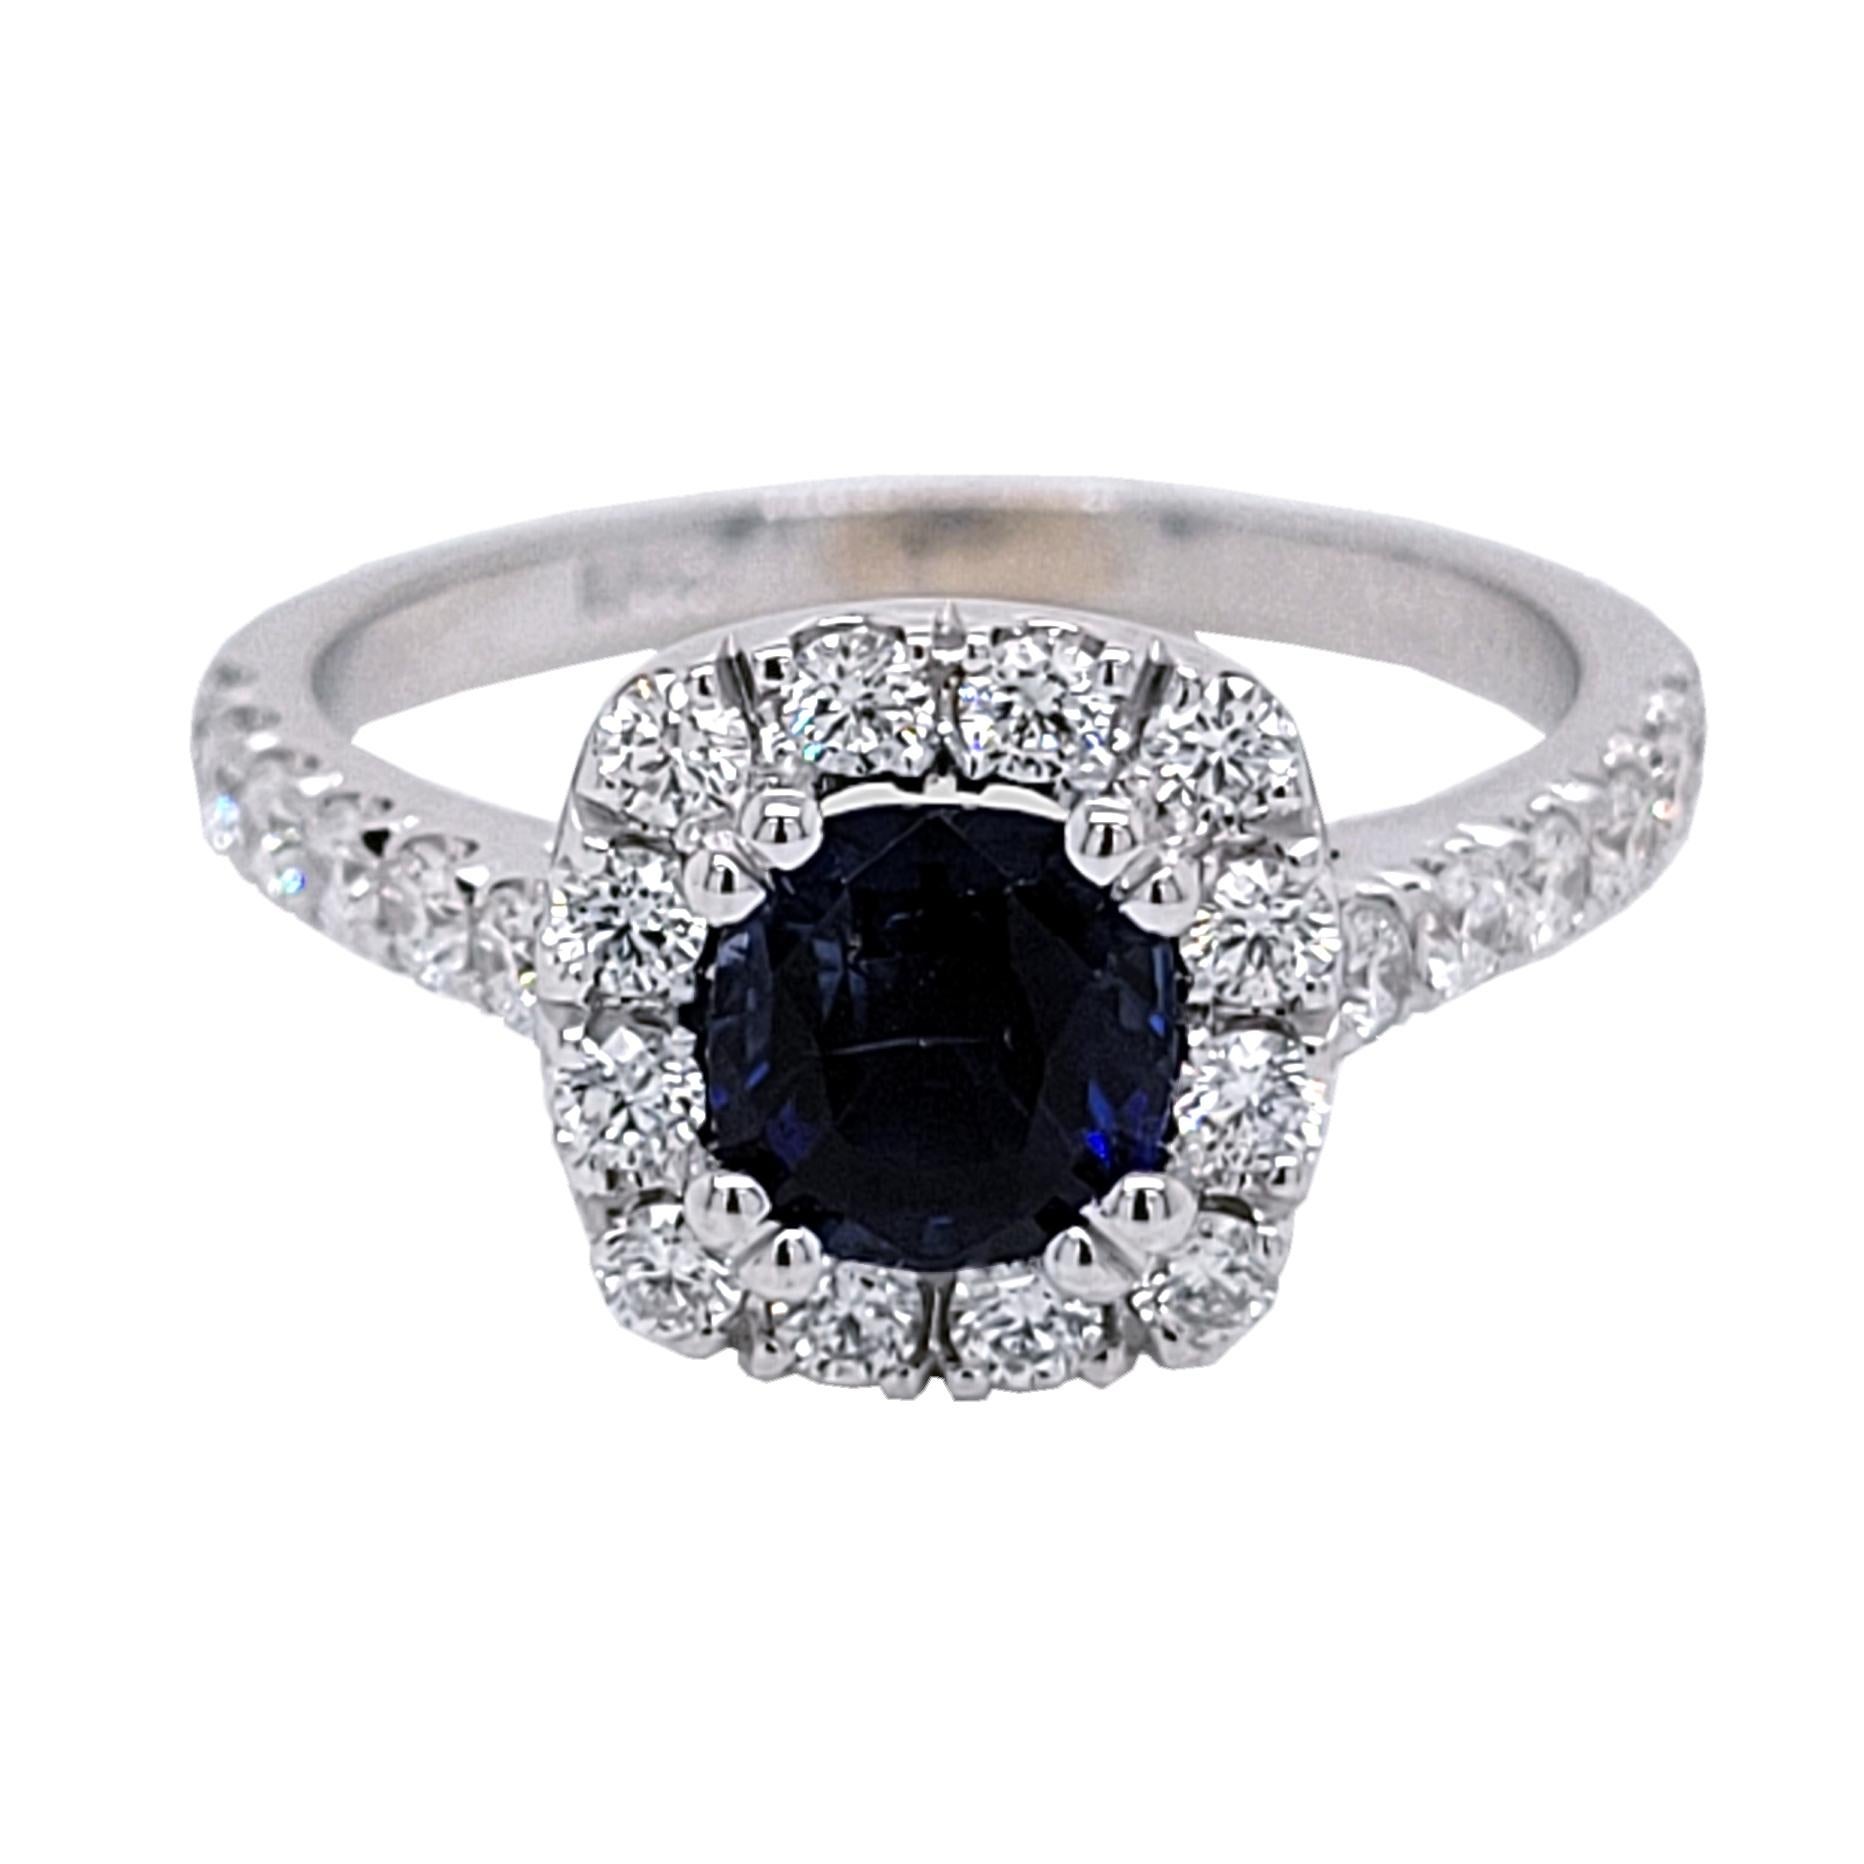 A  Beautiful Color 1.16 Ct Cushion Shaped Sapphire set in a gorgeous 18k gold  Pave set engagement Ring with halo. Total diamond weight of 0.61 Ct. diamonds on the side. 

Center stone: 1.16 Ct Cushion Shape Sapphire
Side stones: 0.61 total carat